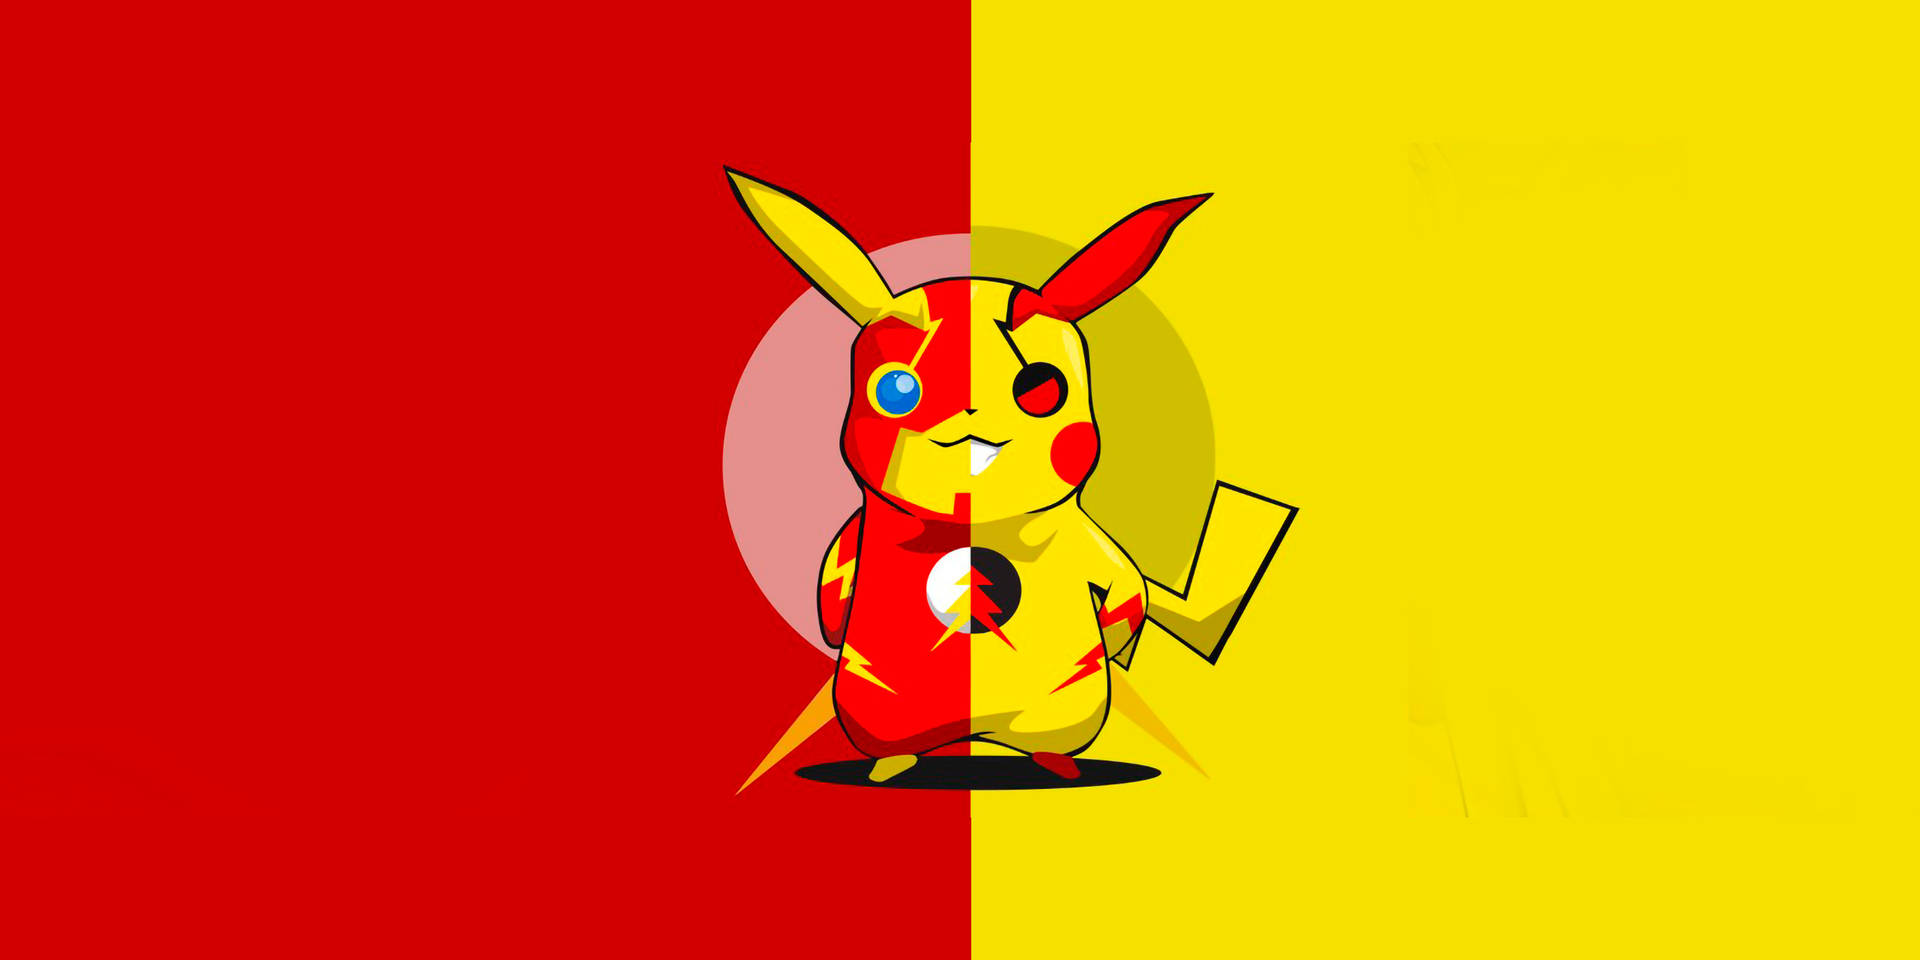 Pikachu In Red And Yellow Wallpaper